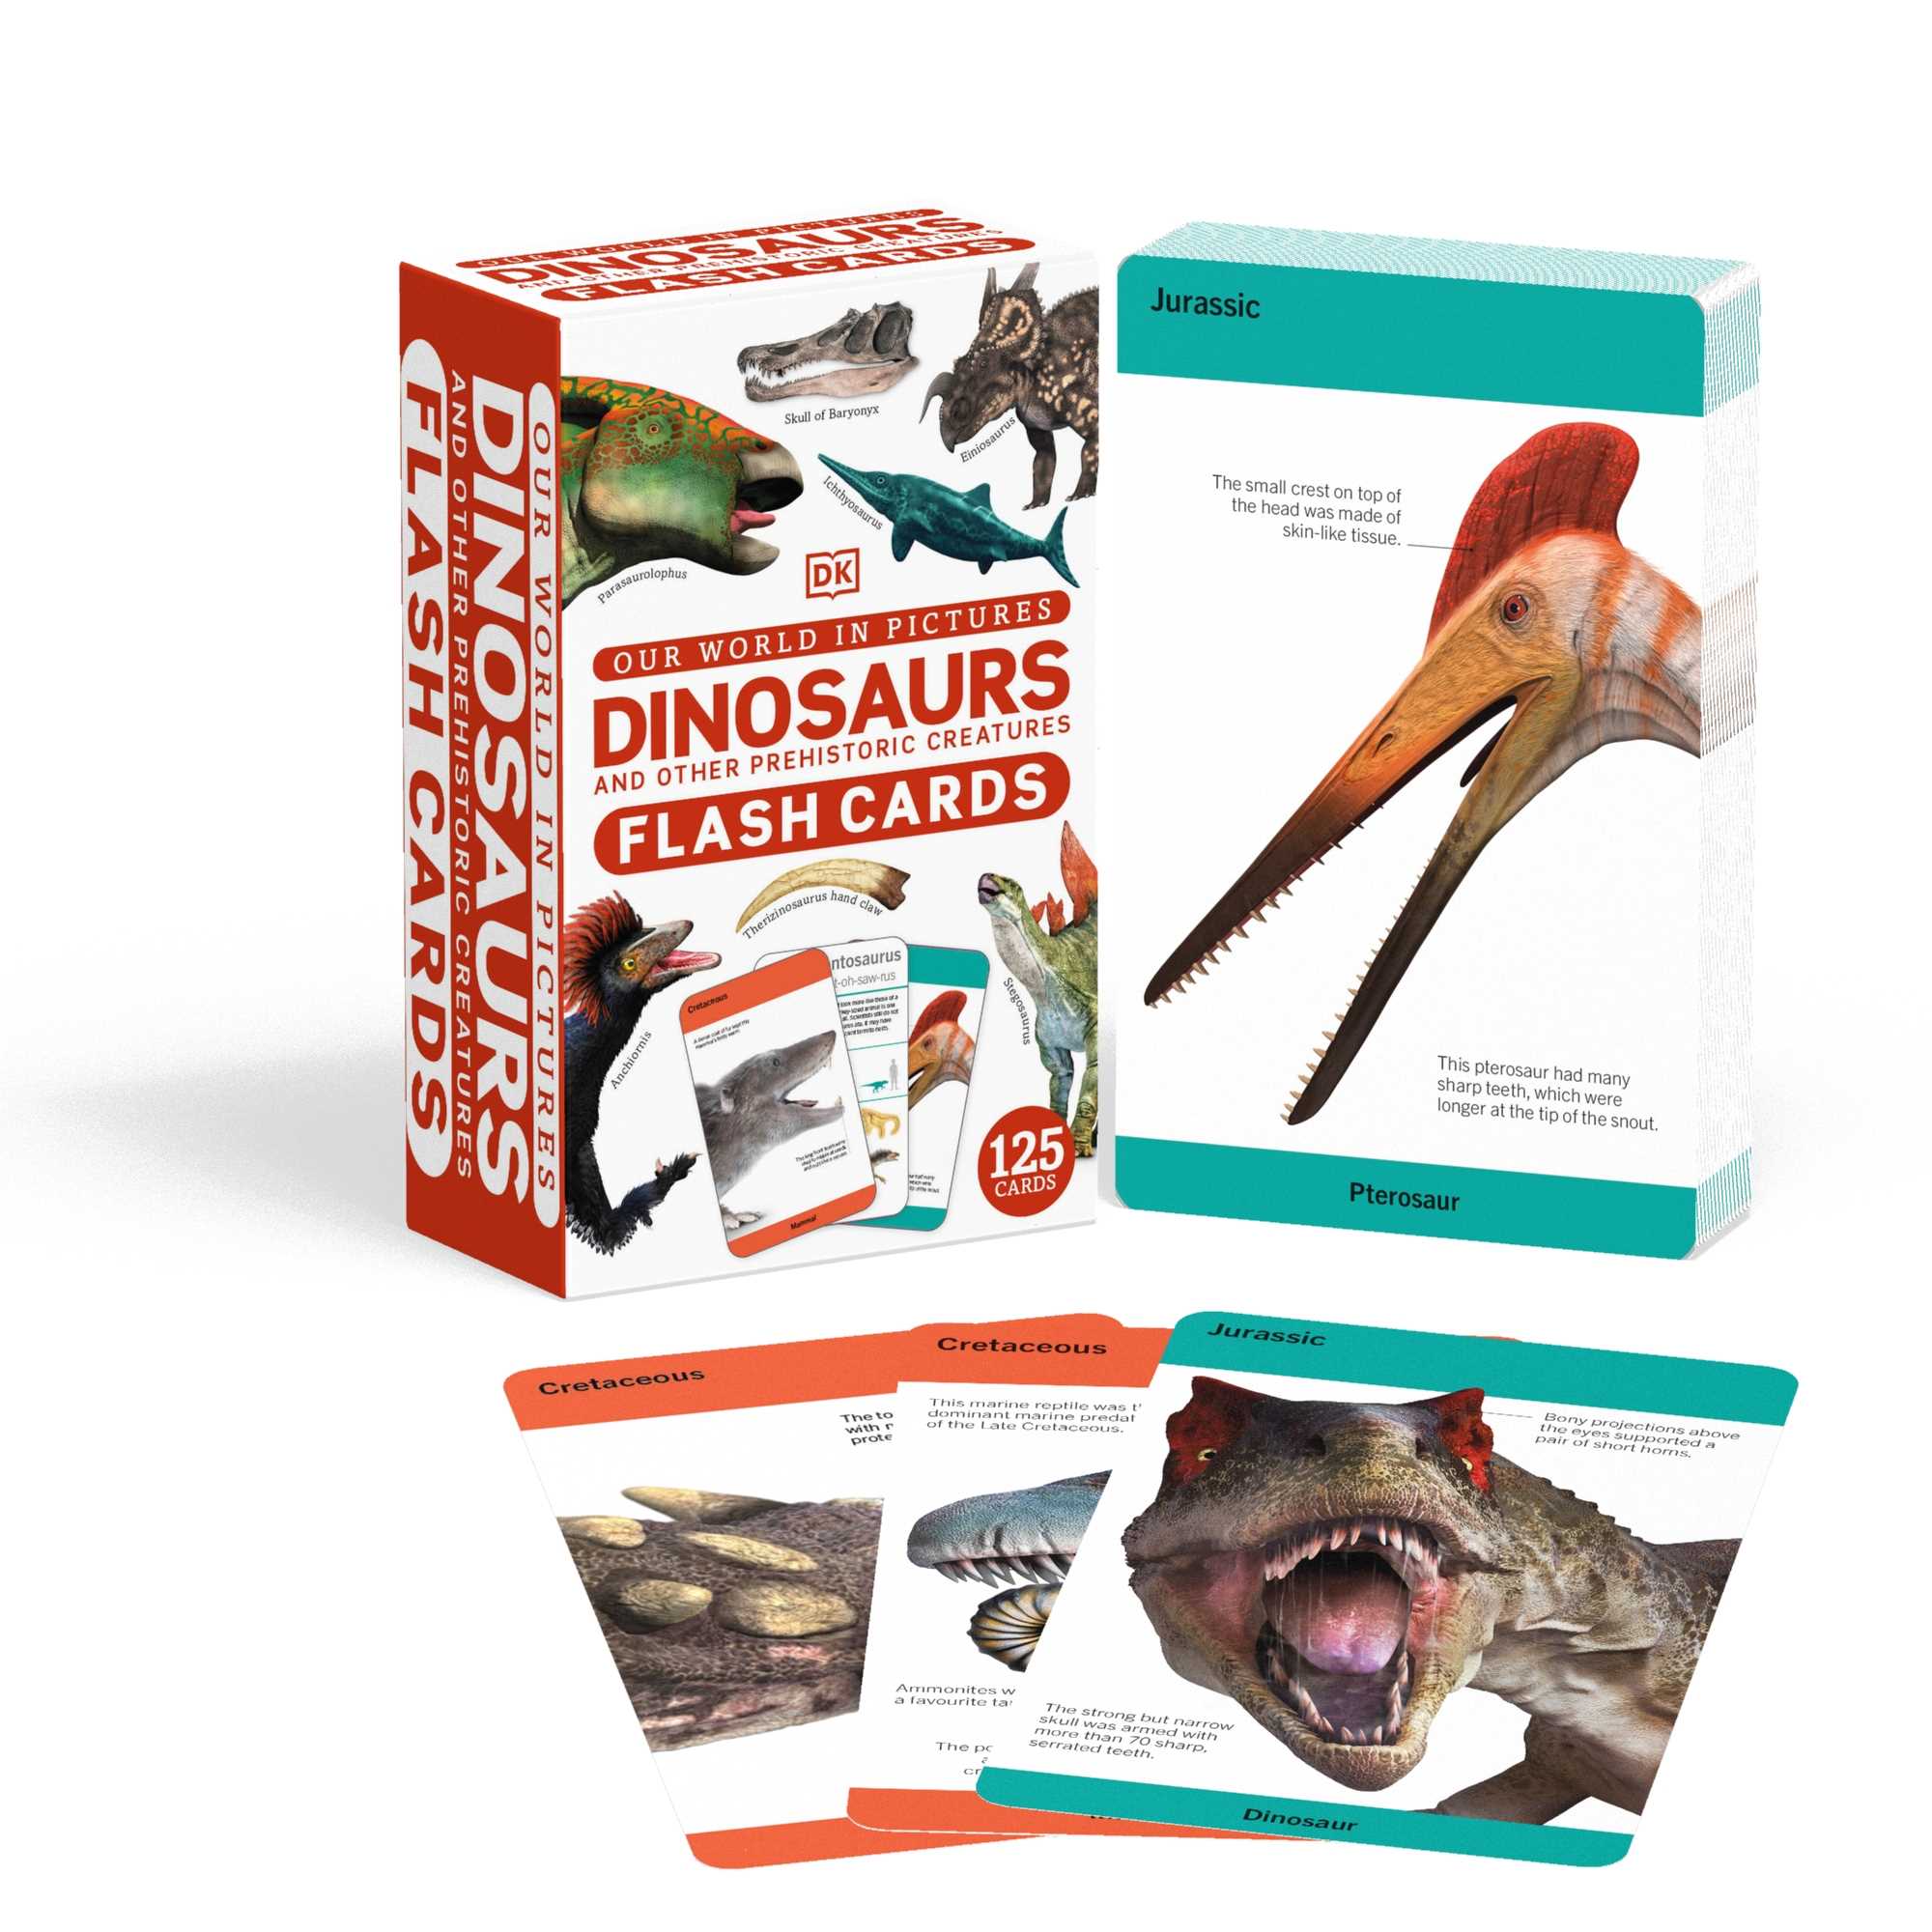 Dinosaurs and Other Prehistoric Creatures Flash Cards (Our World in Pictures)